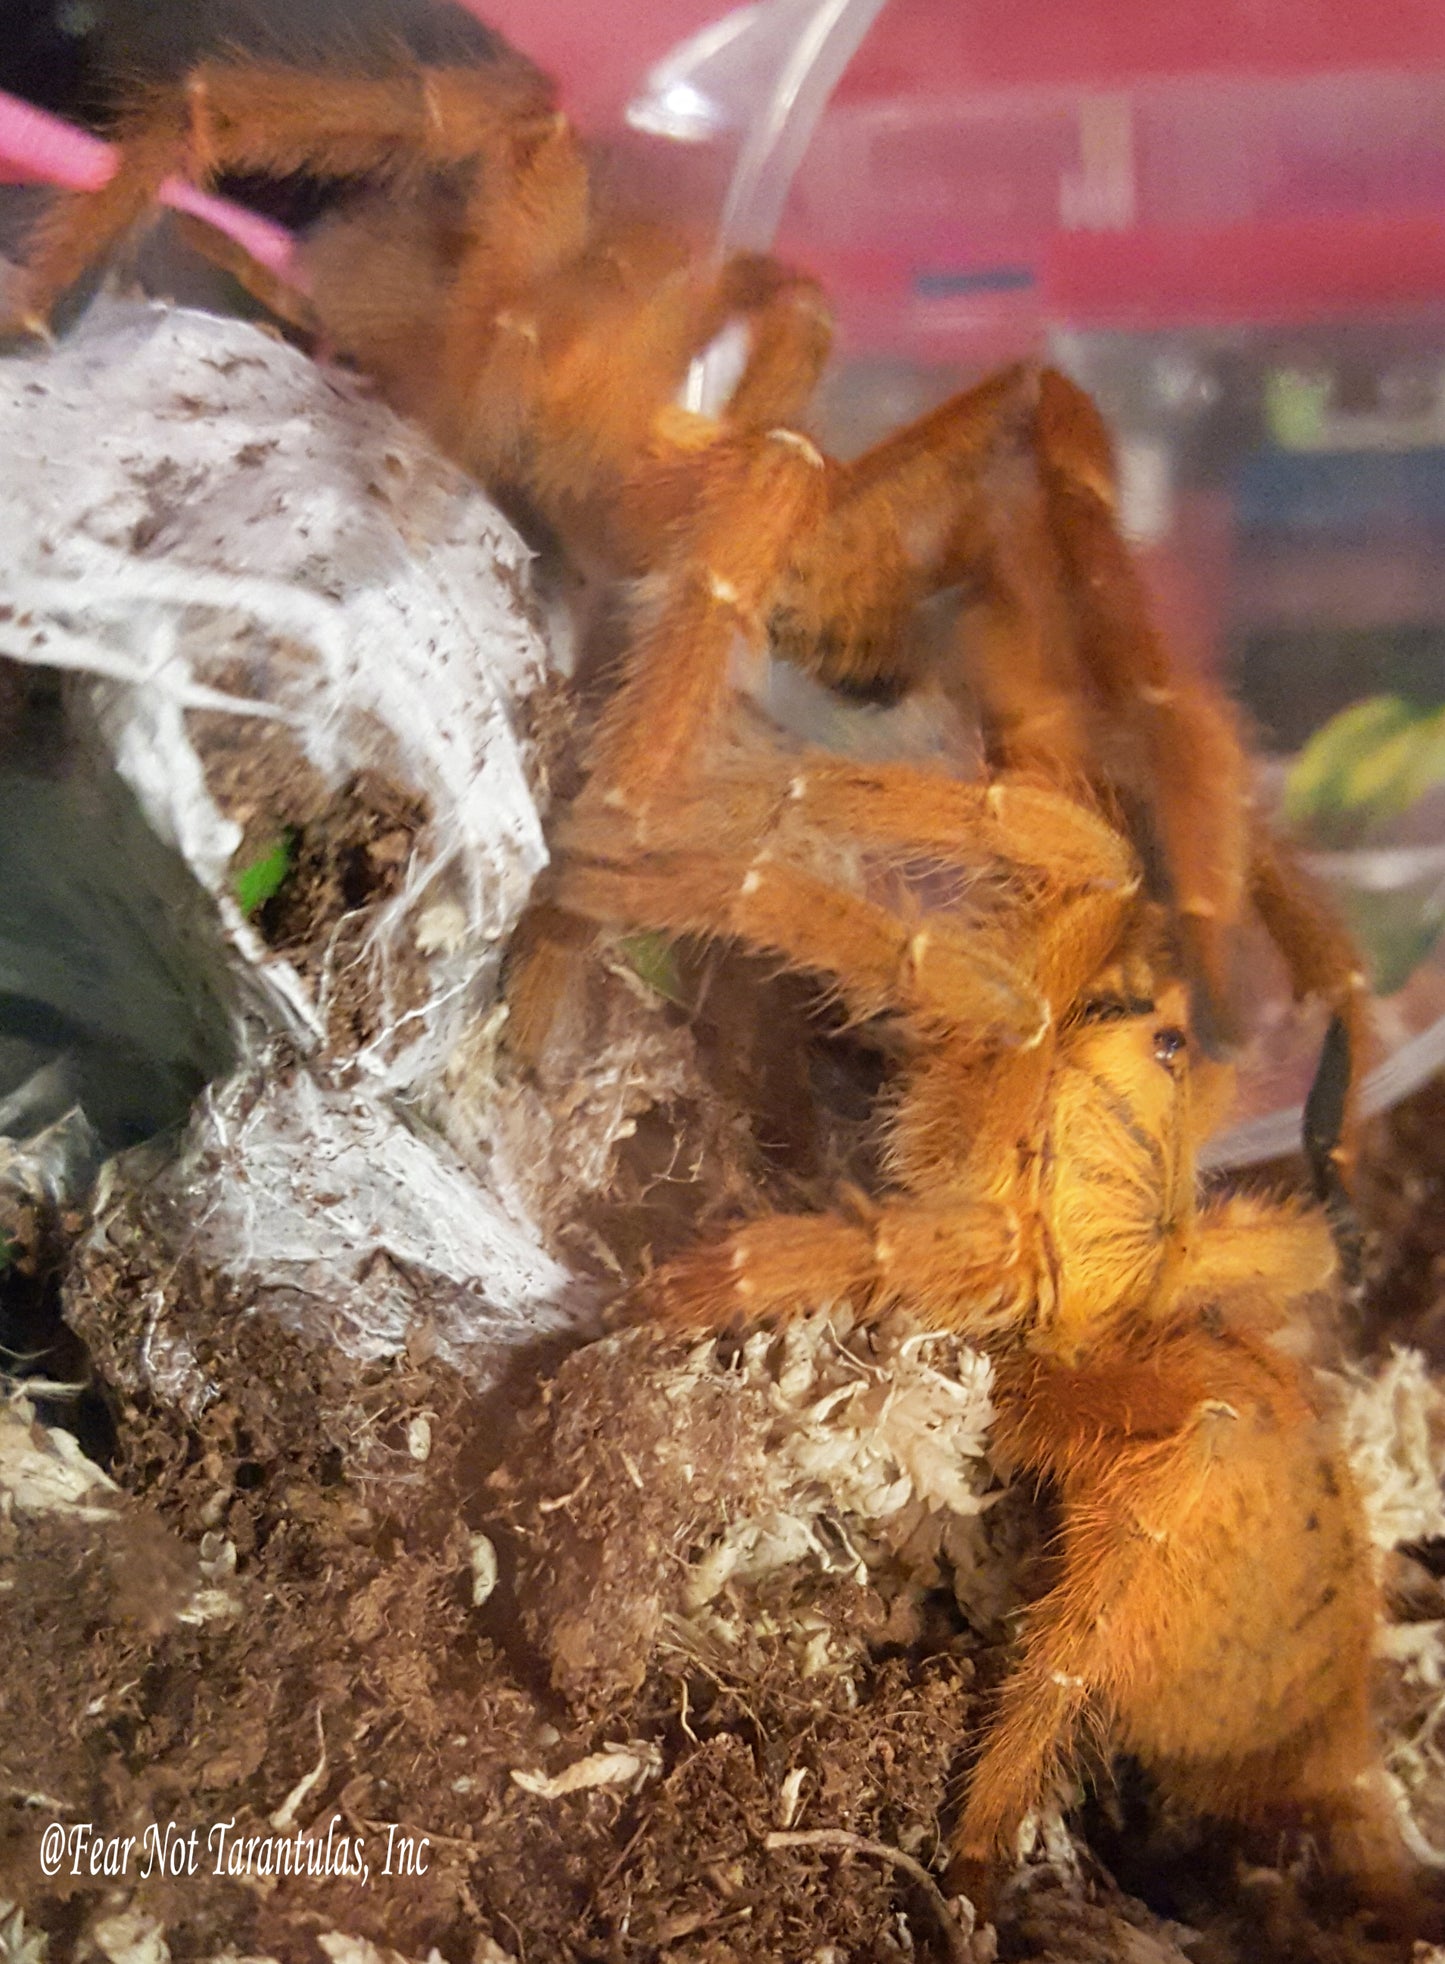 Pterinochilus murinus (Orange Baboon Tarantula, OBT)  about 3/4" - 1" Free for orders $175 and over!  (after discounts and does not include shipping) One freebie per shipment.